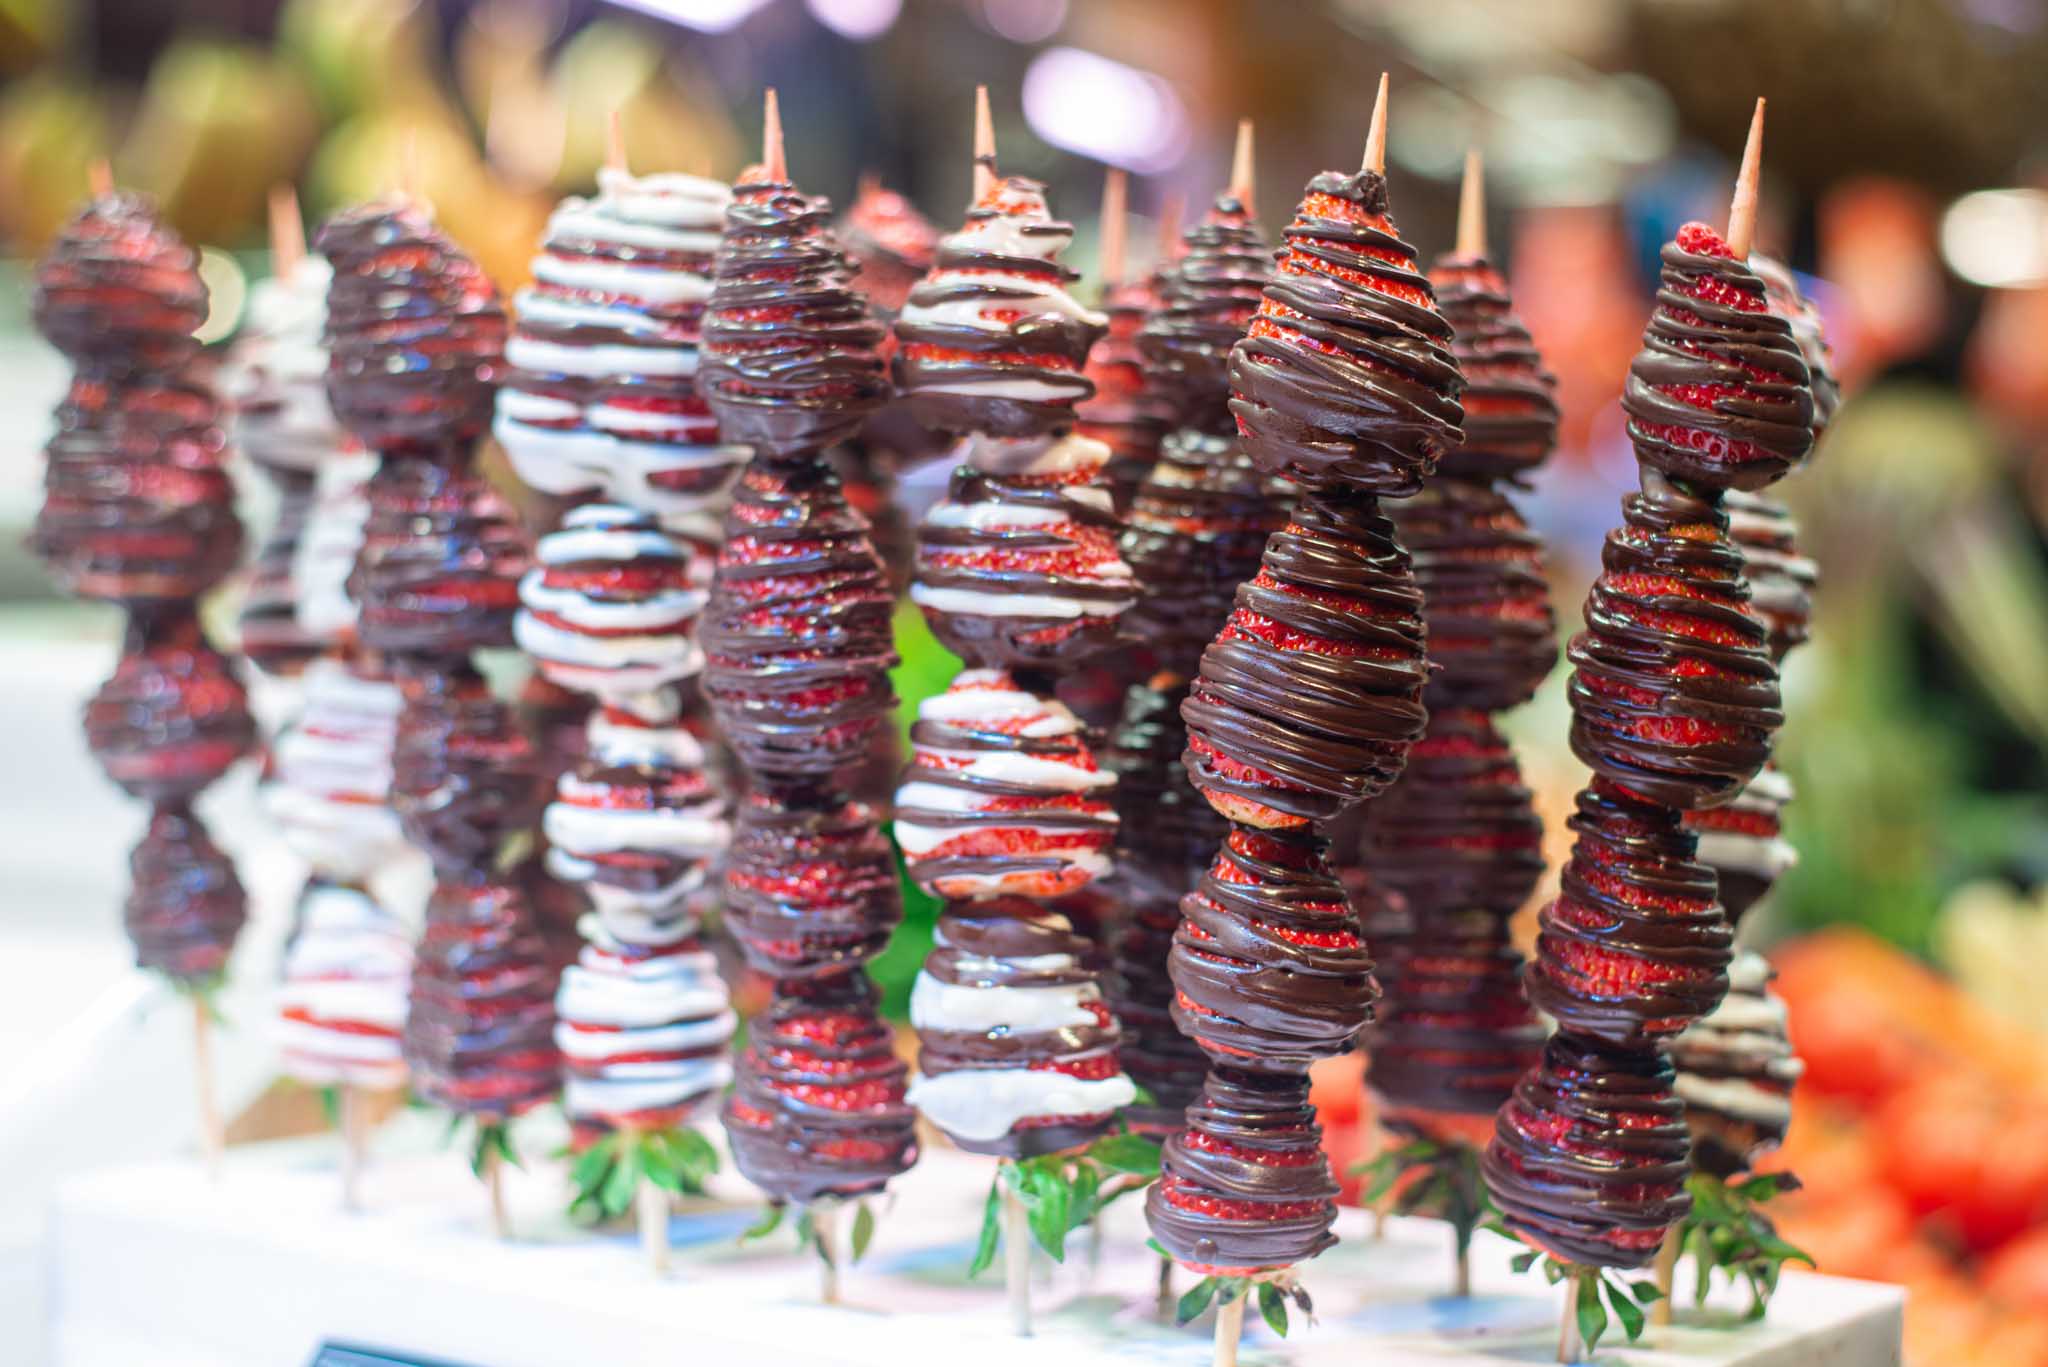 The Real Food Academy Miami chocolate covered fruit skewers.